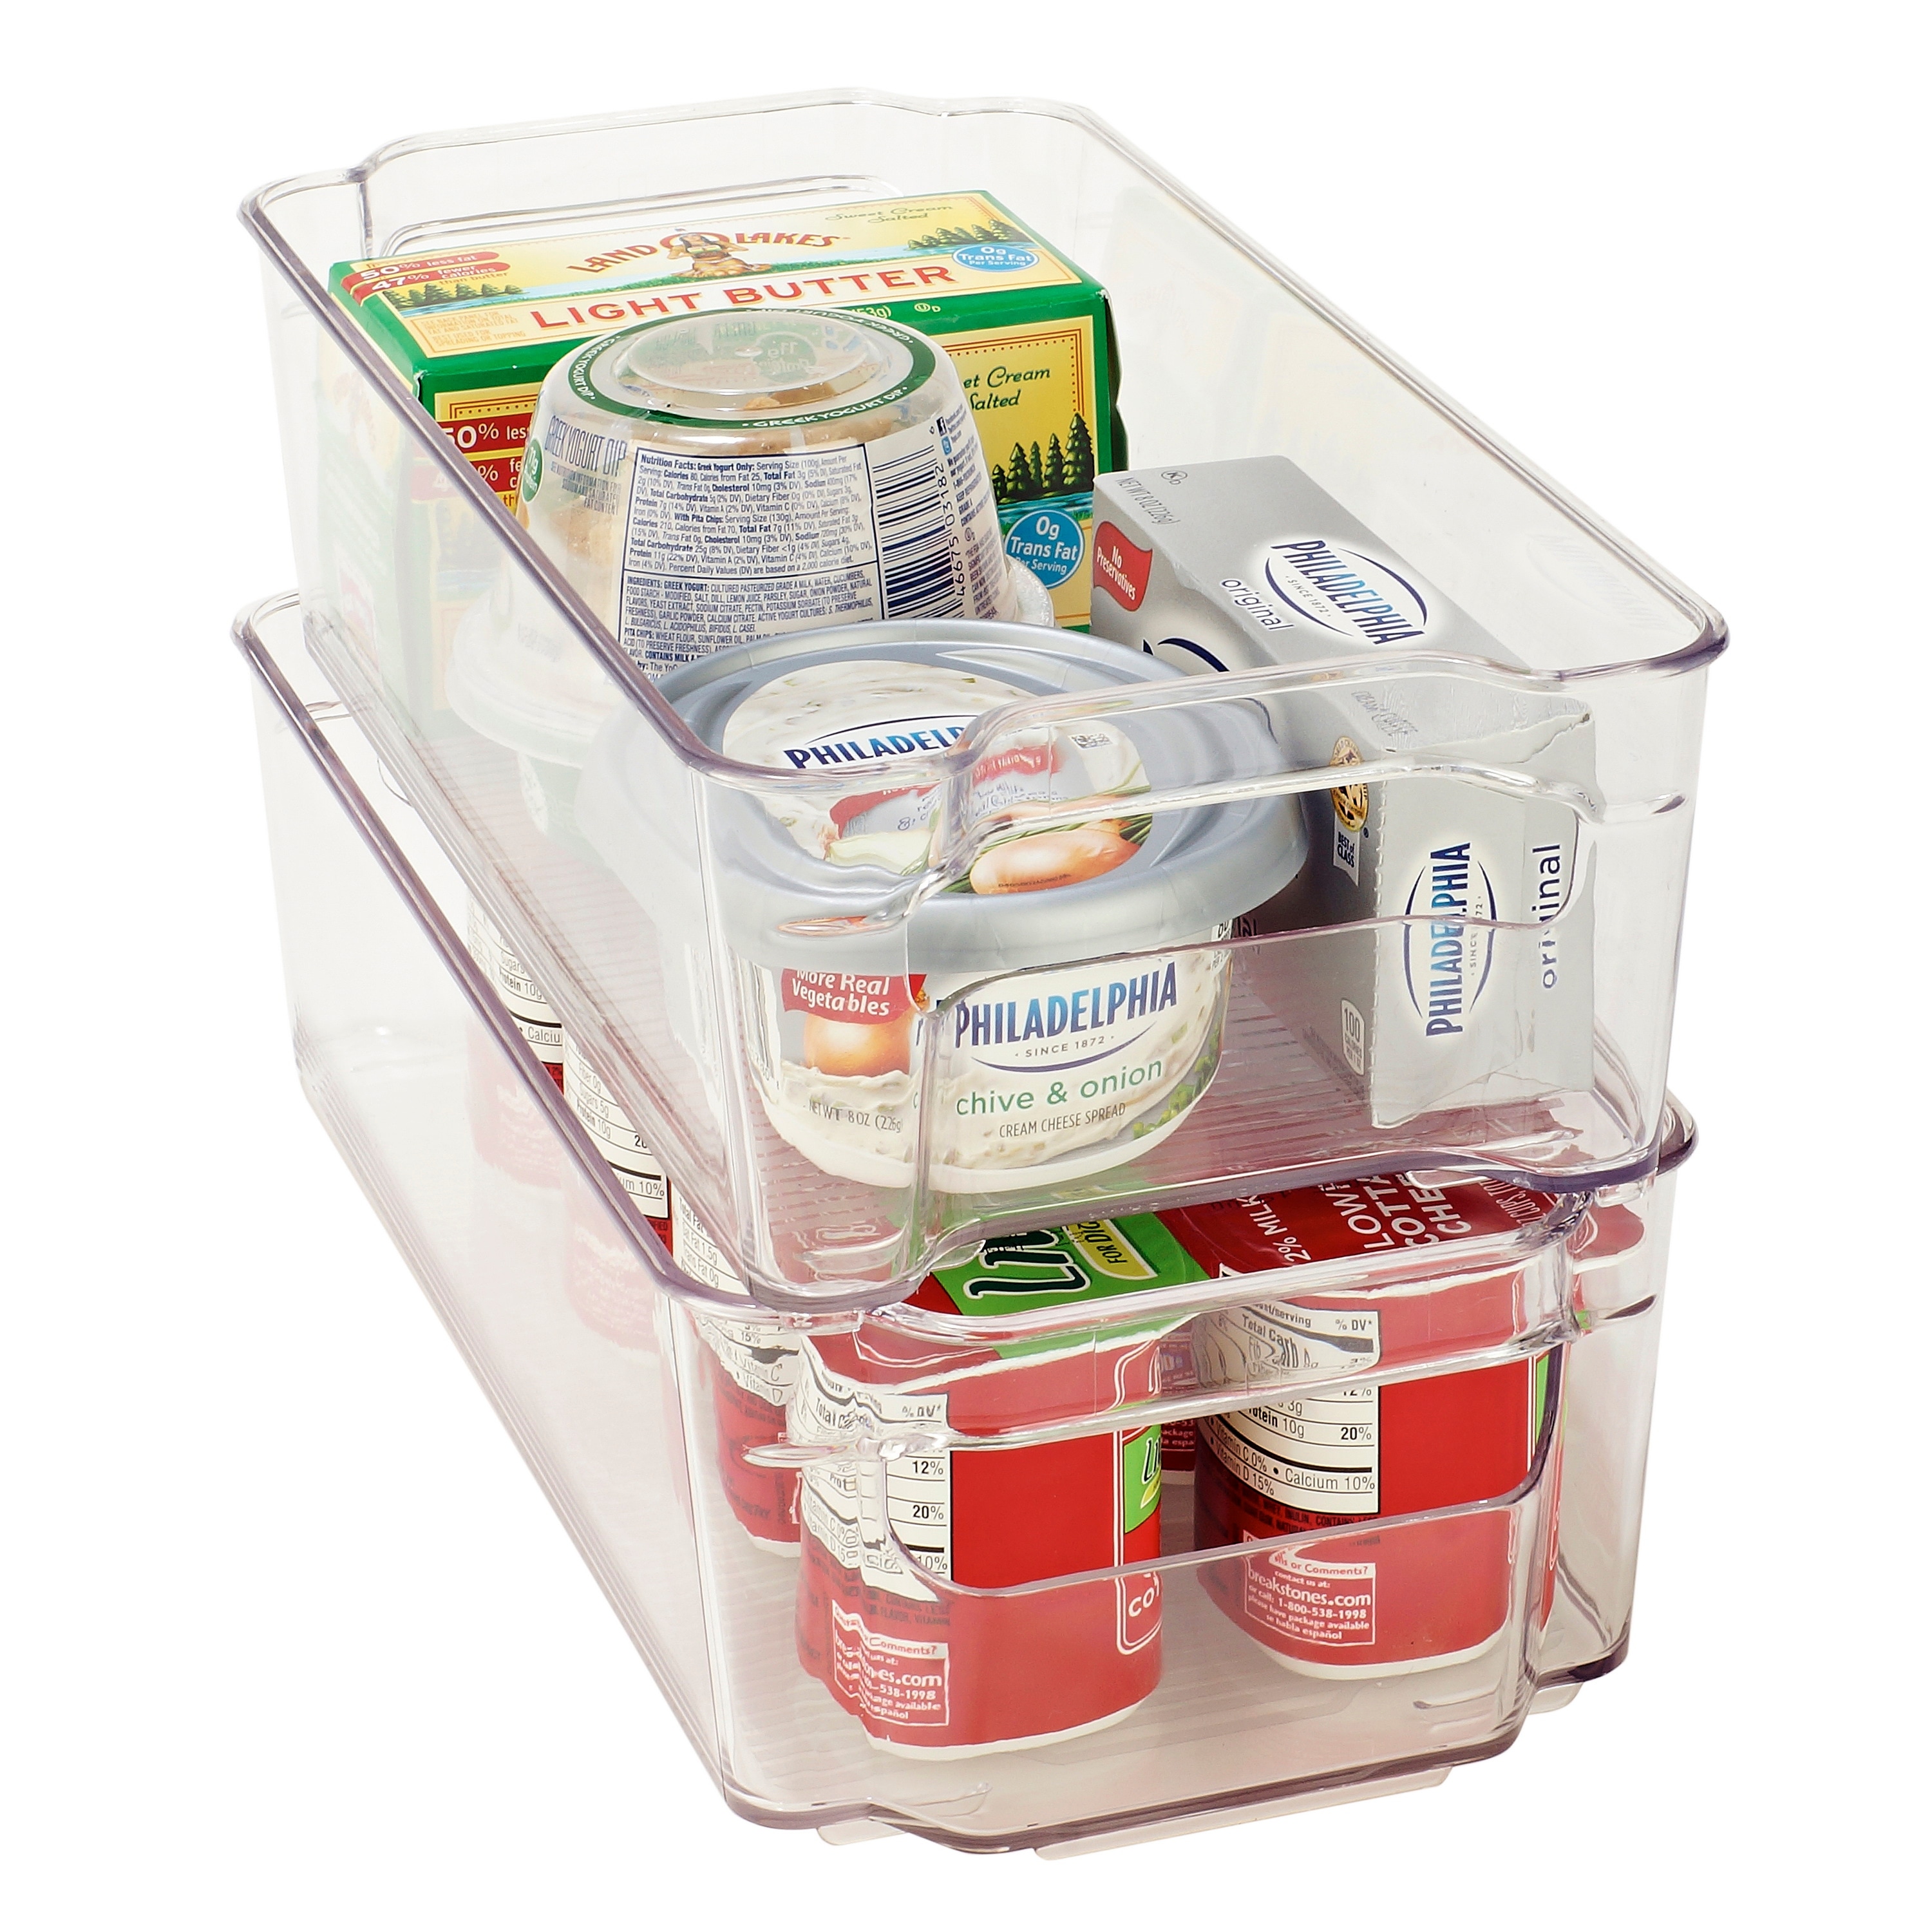 Home Zone Living Pull Out Under Sink Organizer with Two Tiers of Storage, 11.6 W x 20 D